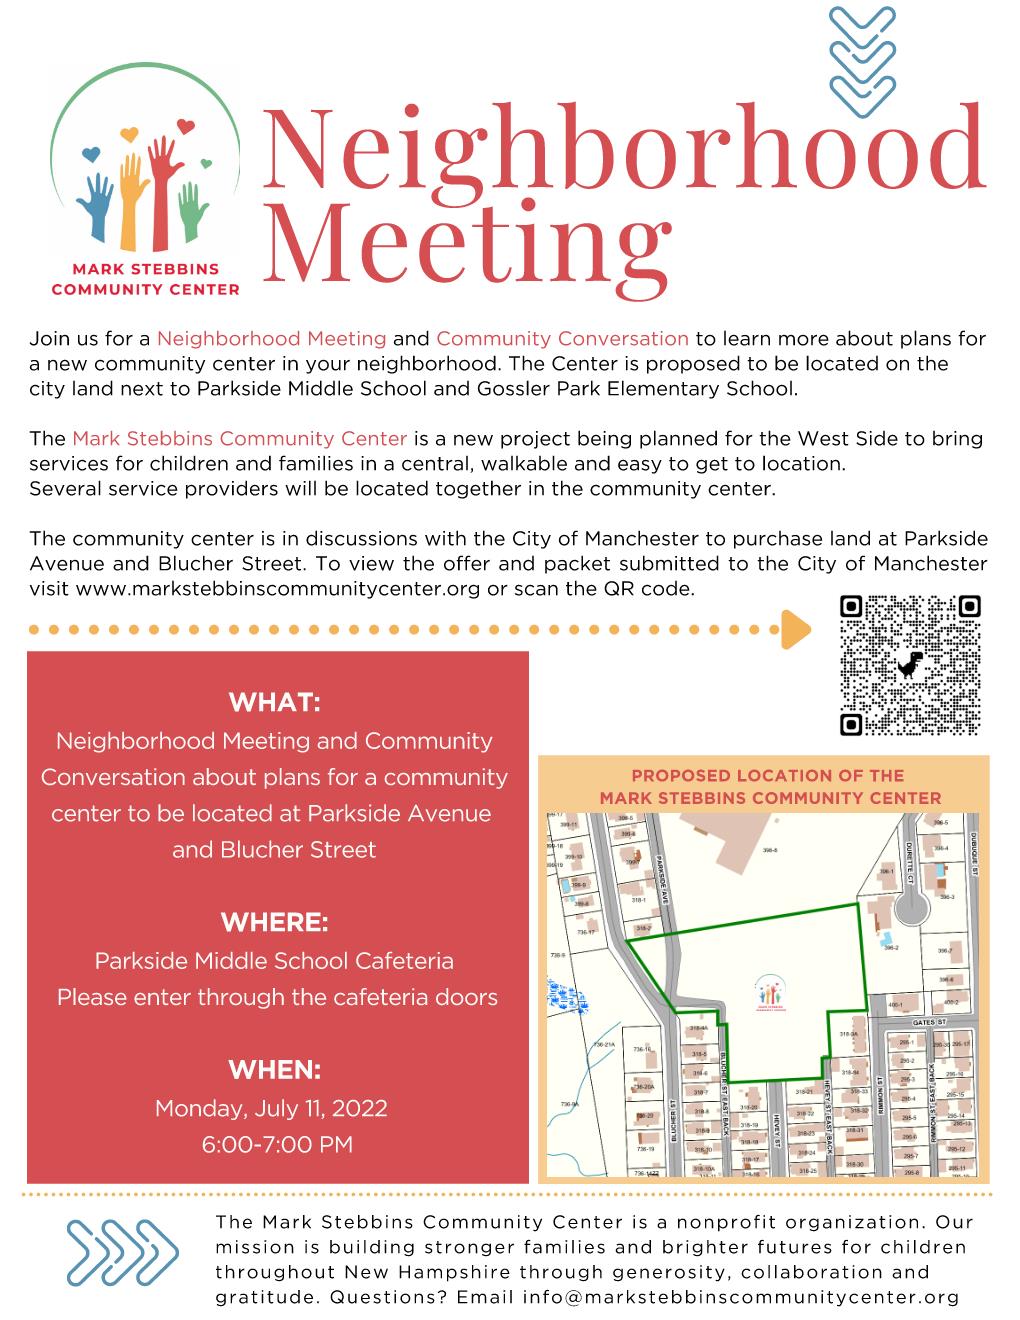 Neighborhood Meeting - 6:00pm on July 11 at Parkside Middle School